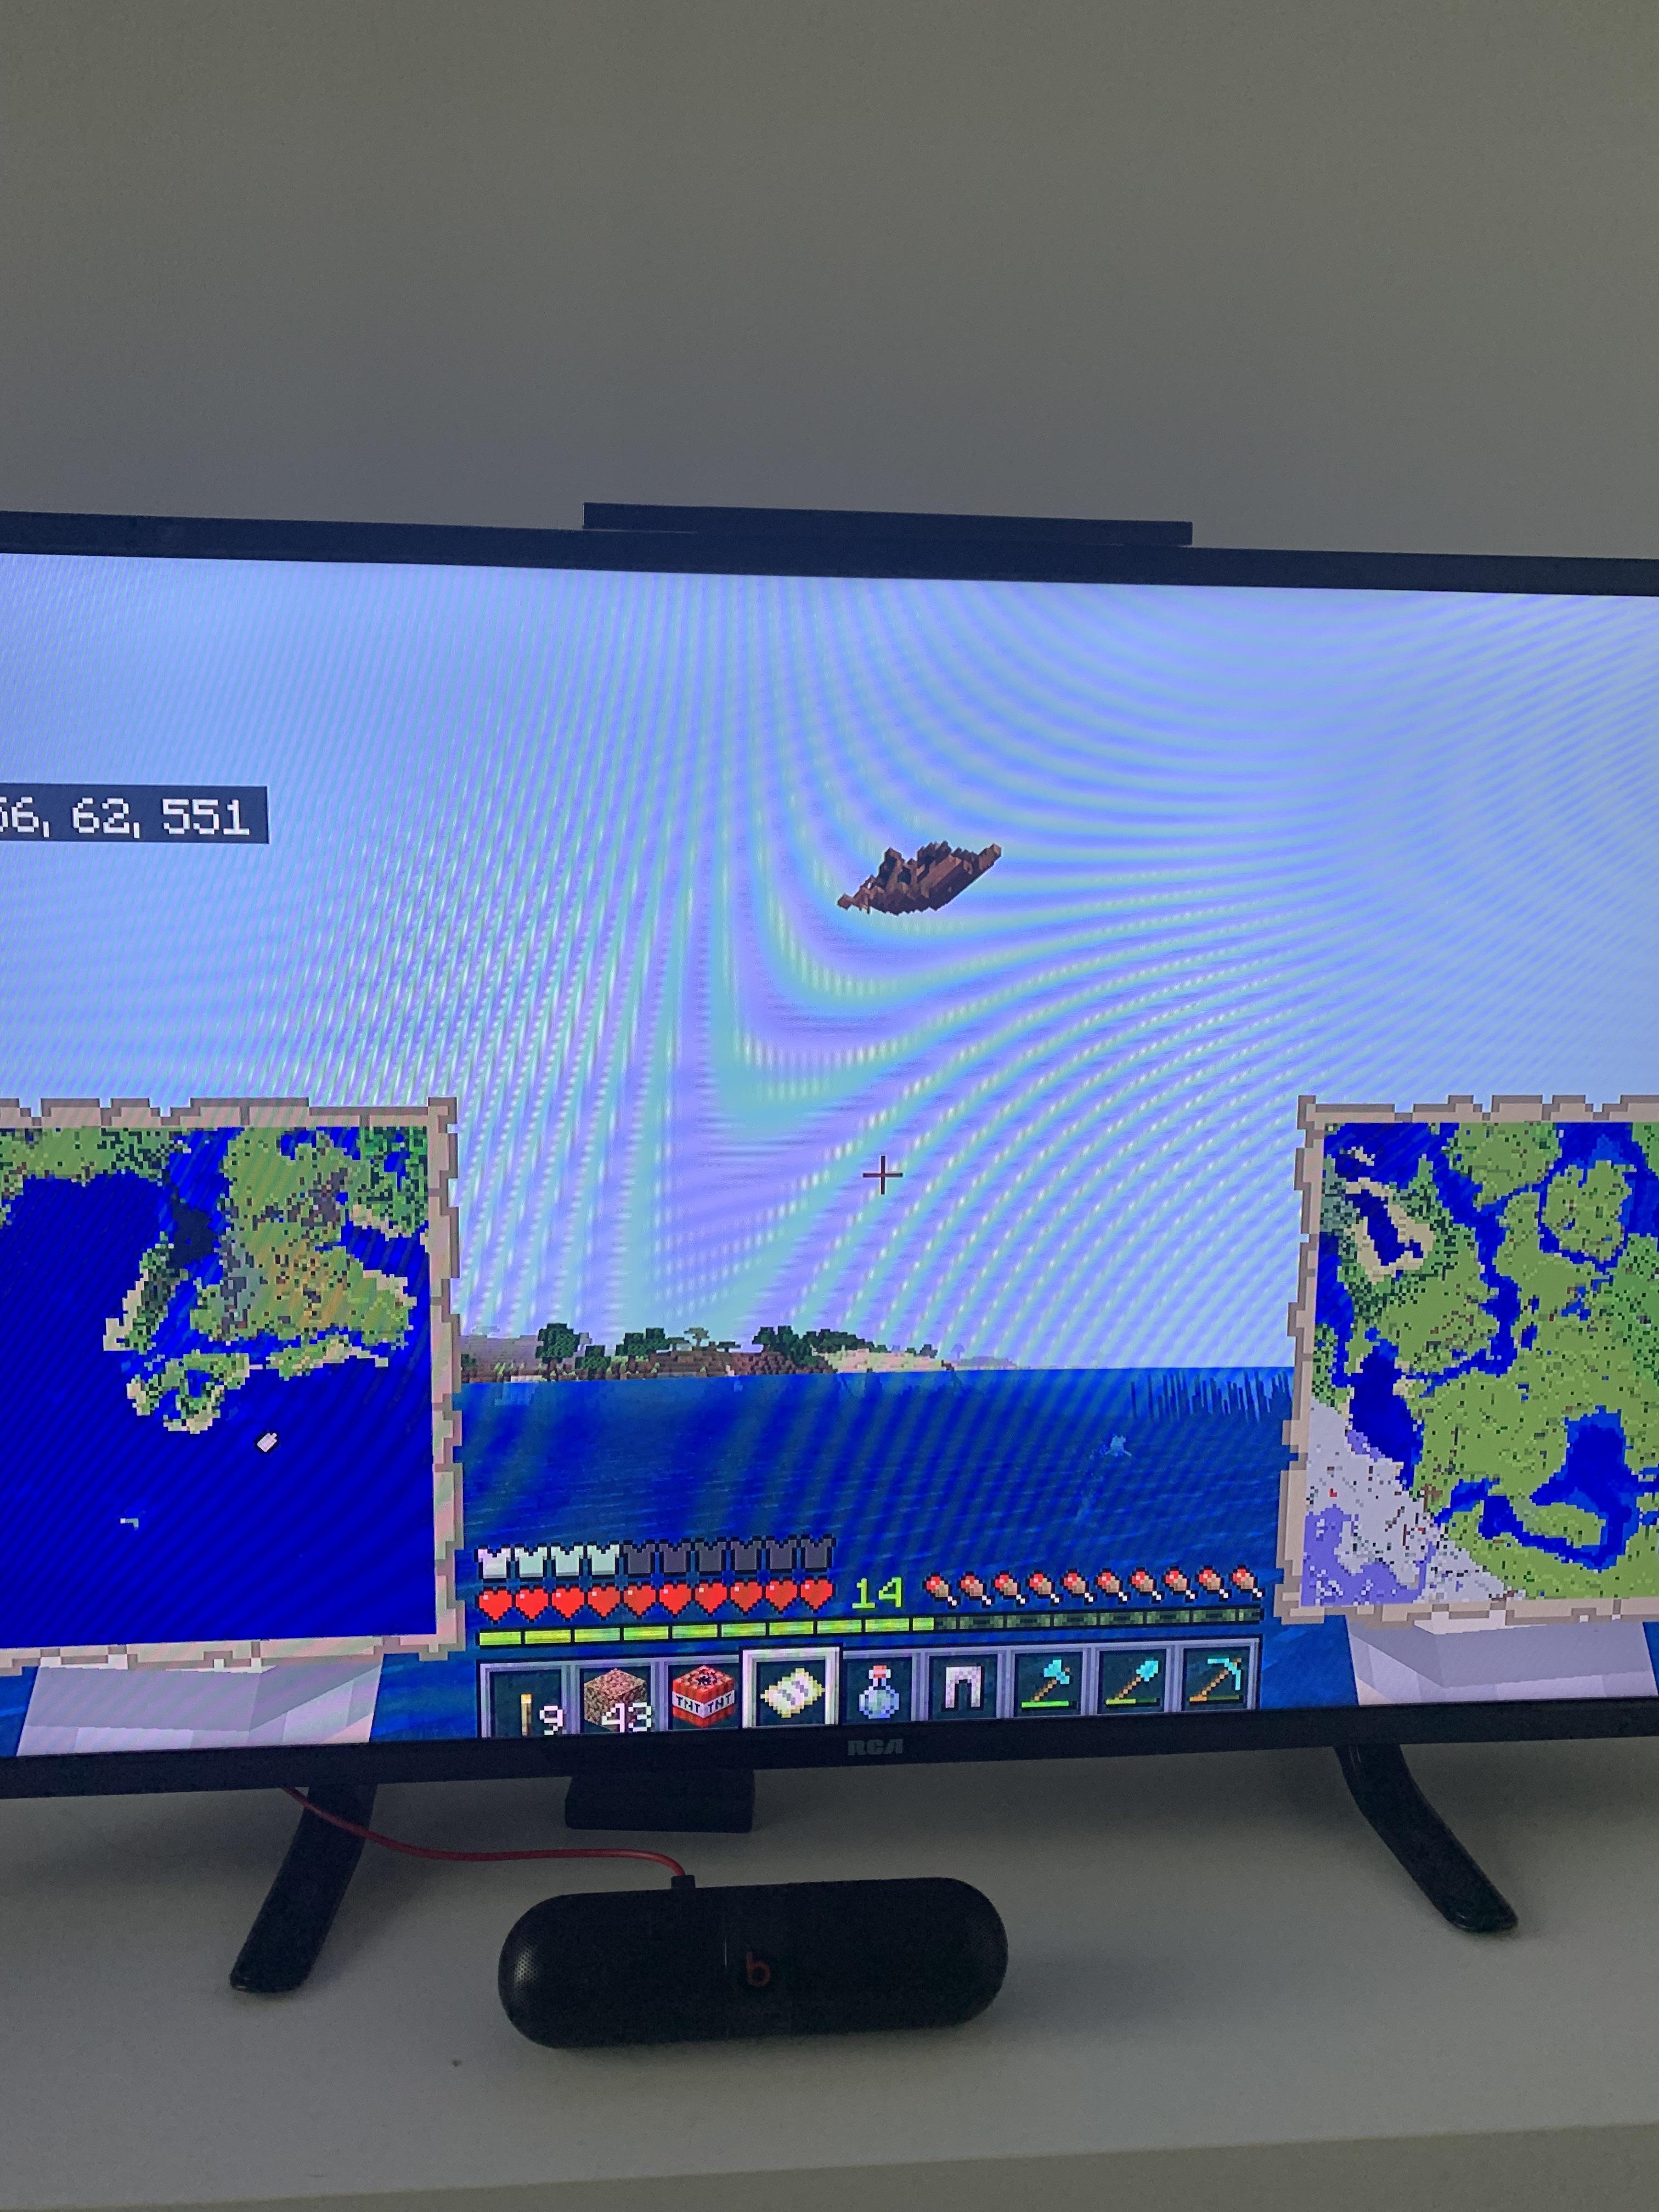 Minecraft Memes - Sky Ship: A Whole New Meaning